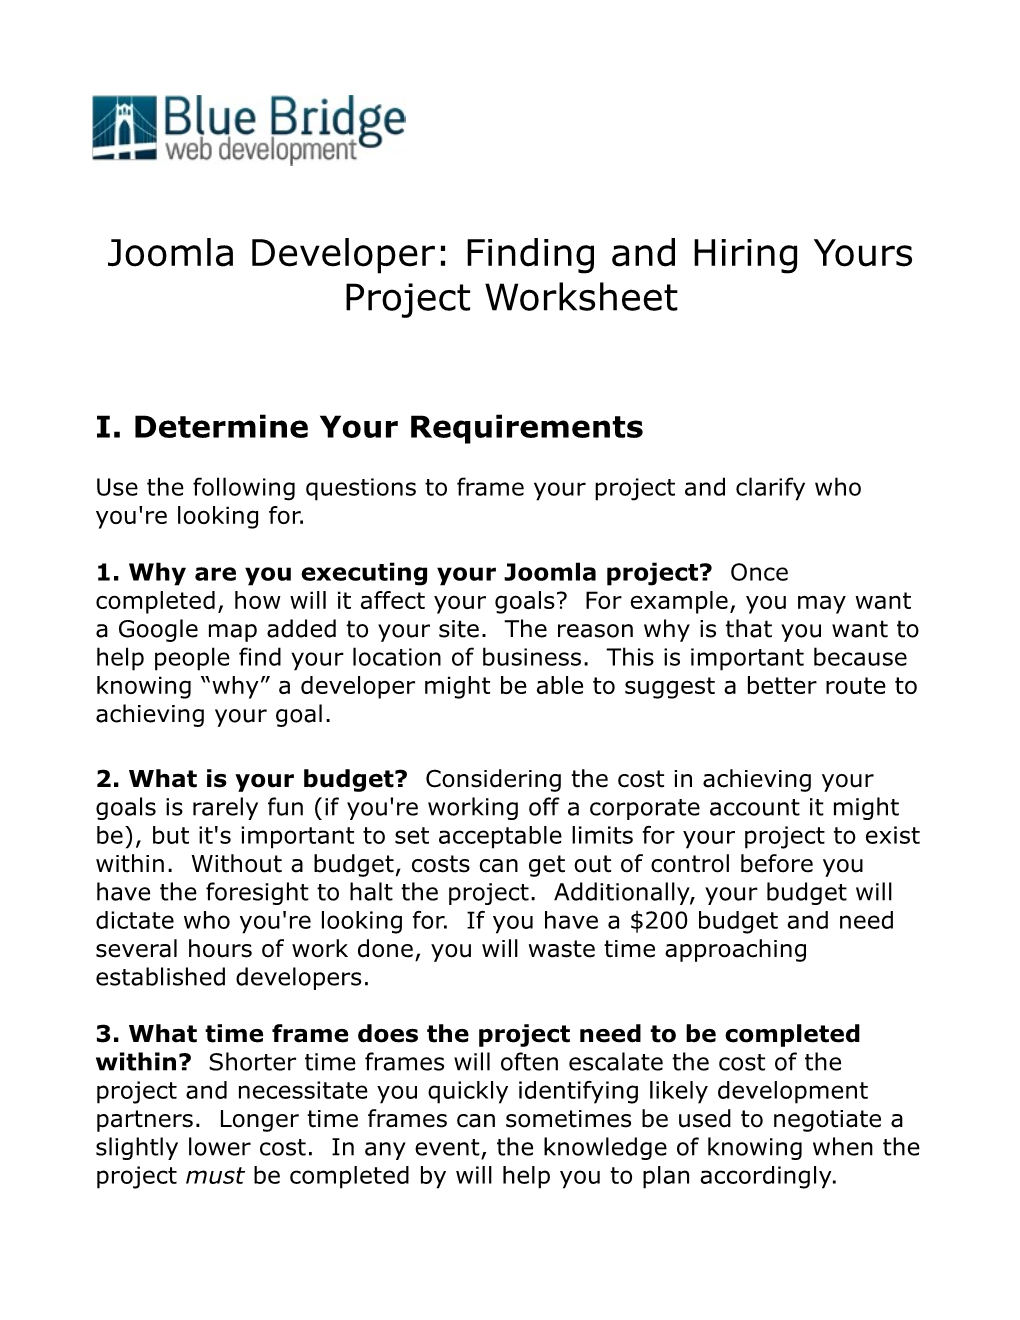 Joomla Developer: Finding and Hiring Yours